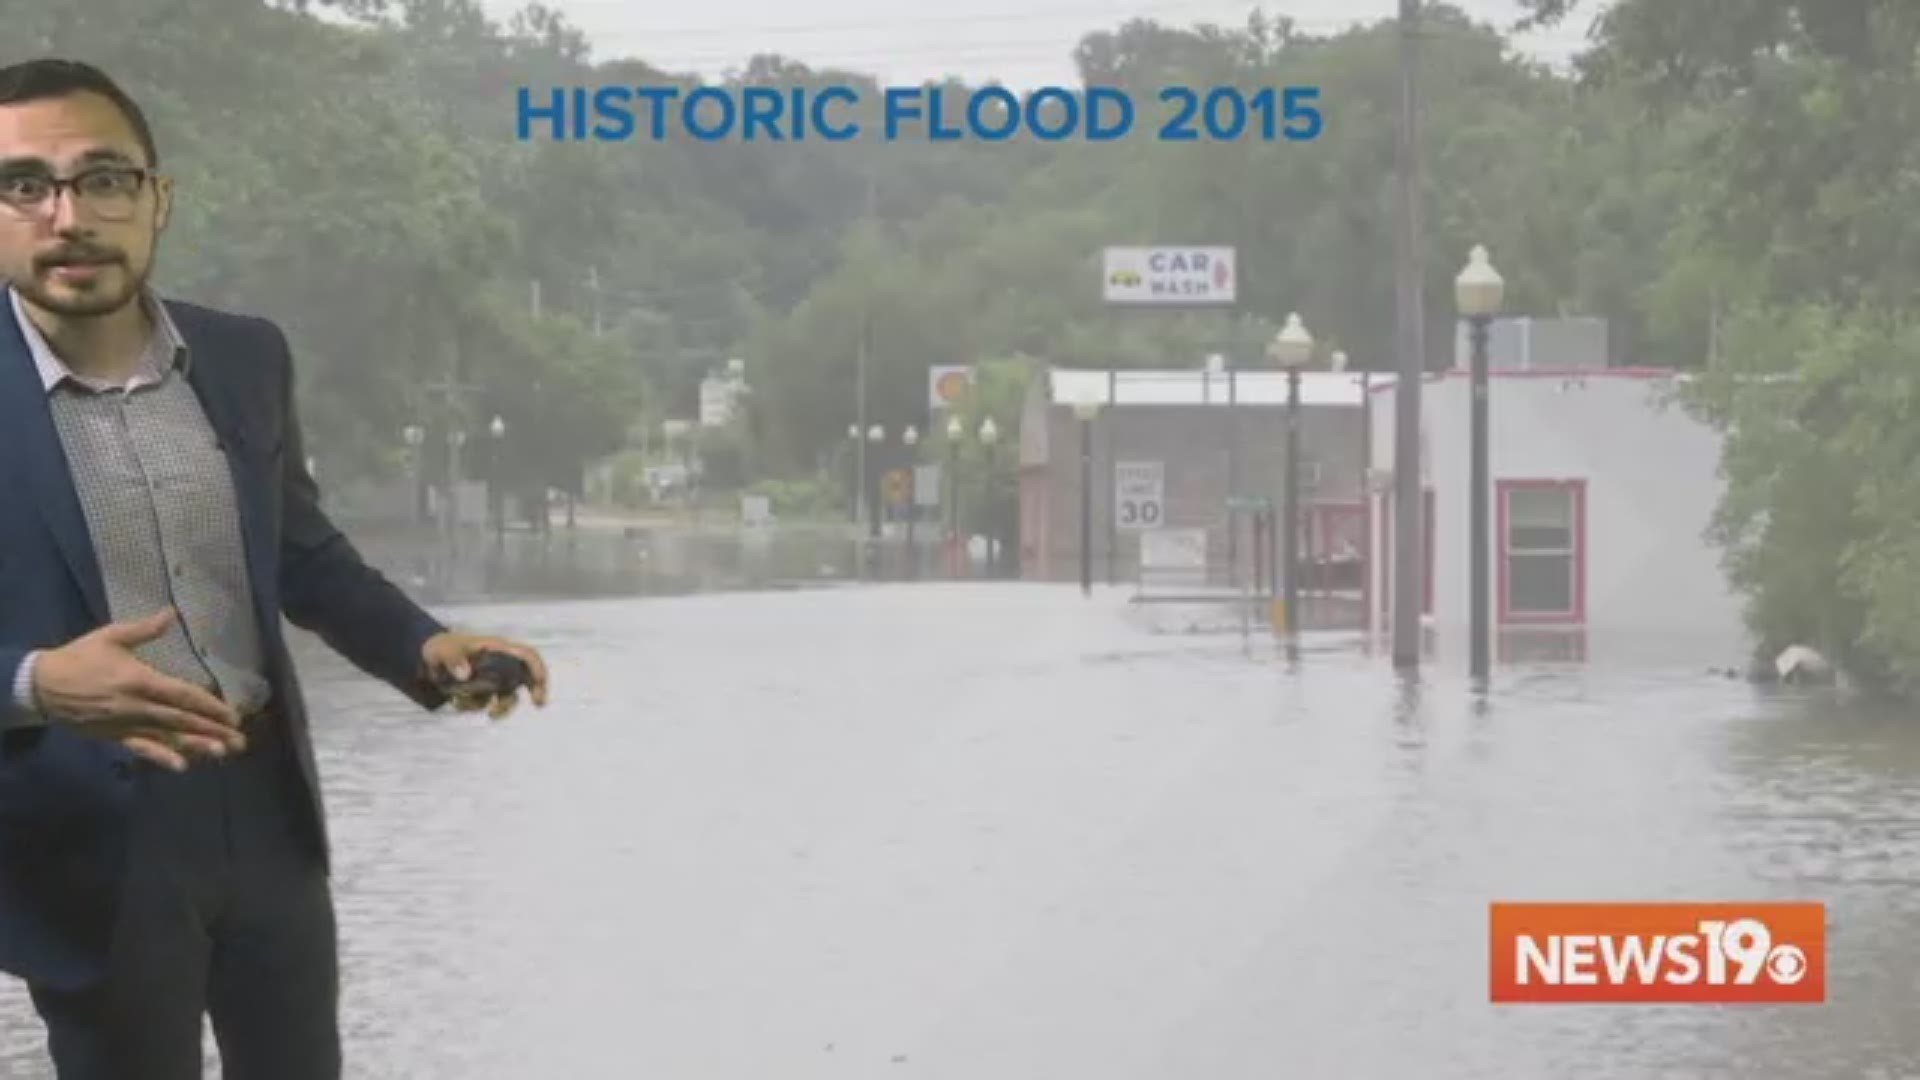 A look back at the historic 2015 flood on the 4th anniversary.